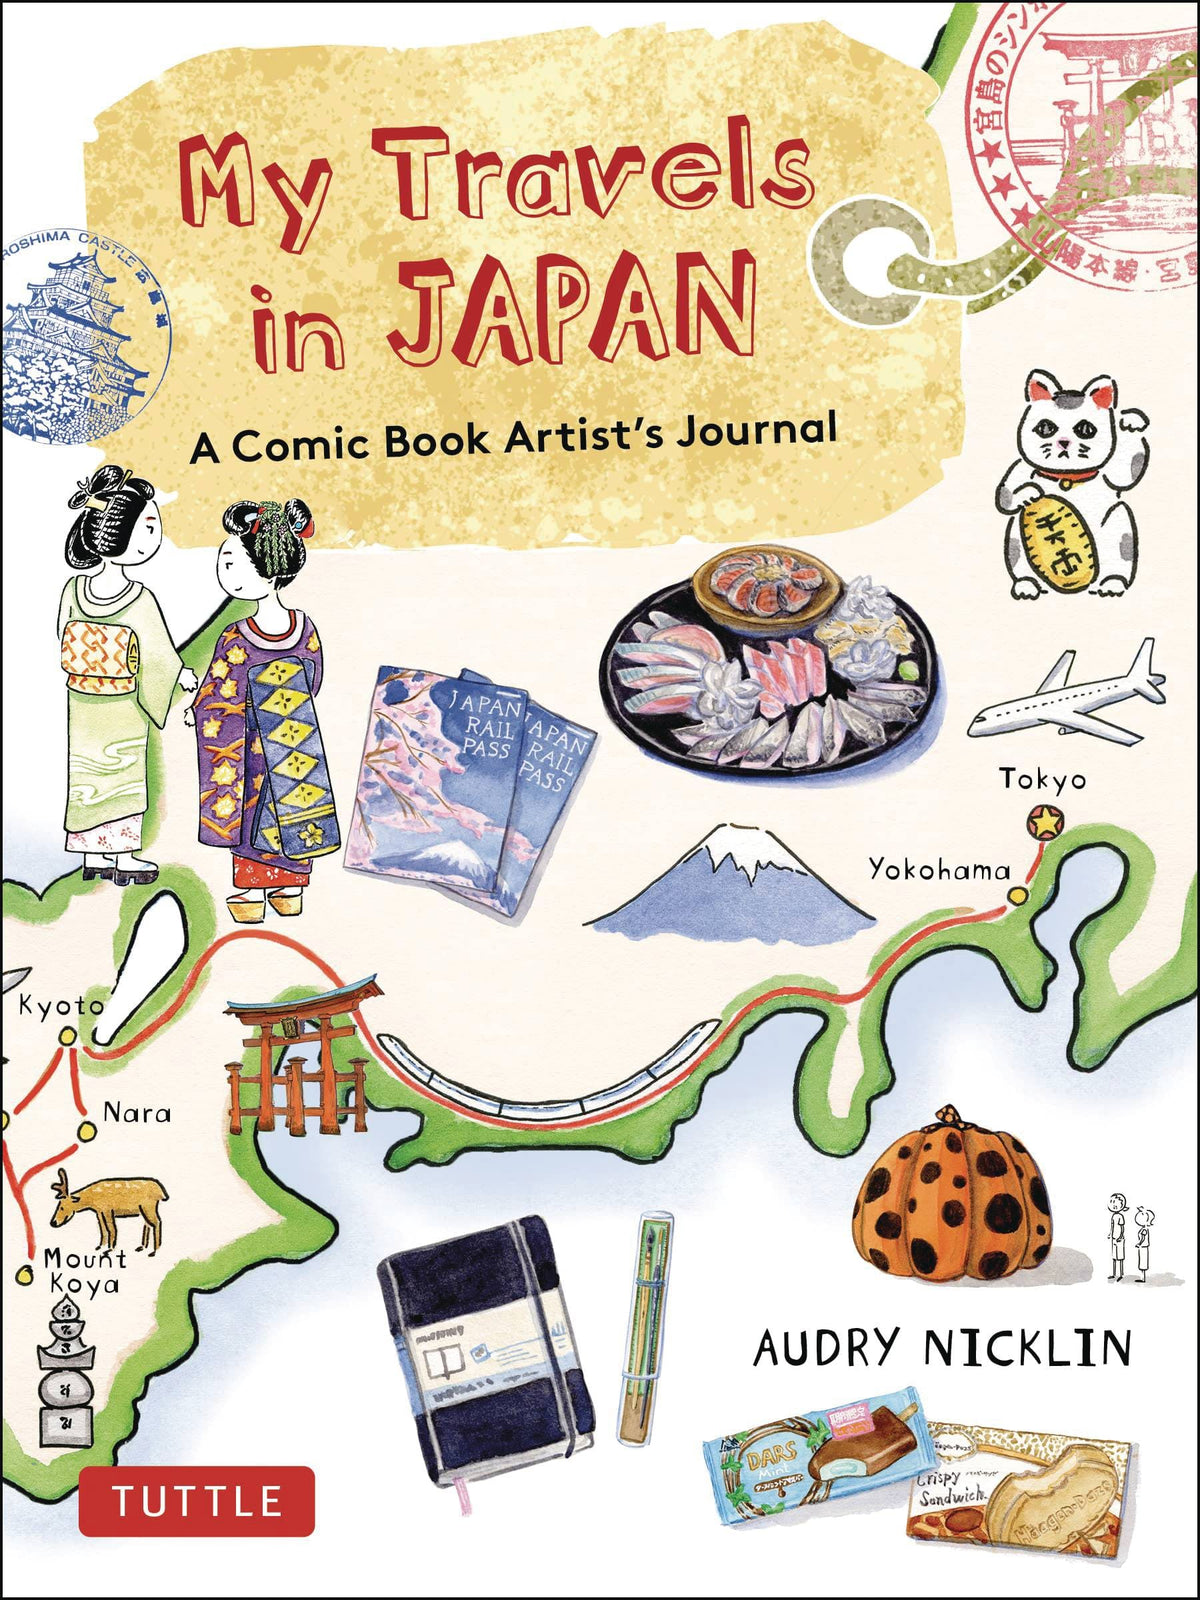 MY TRAVELS IN JAPAN COMIC BOOK ARTISTS AMAZING JOURNEY - Third Eye